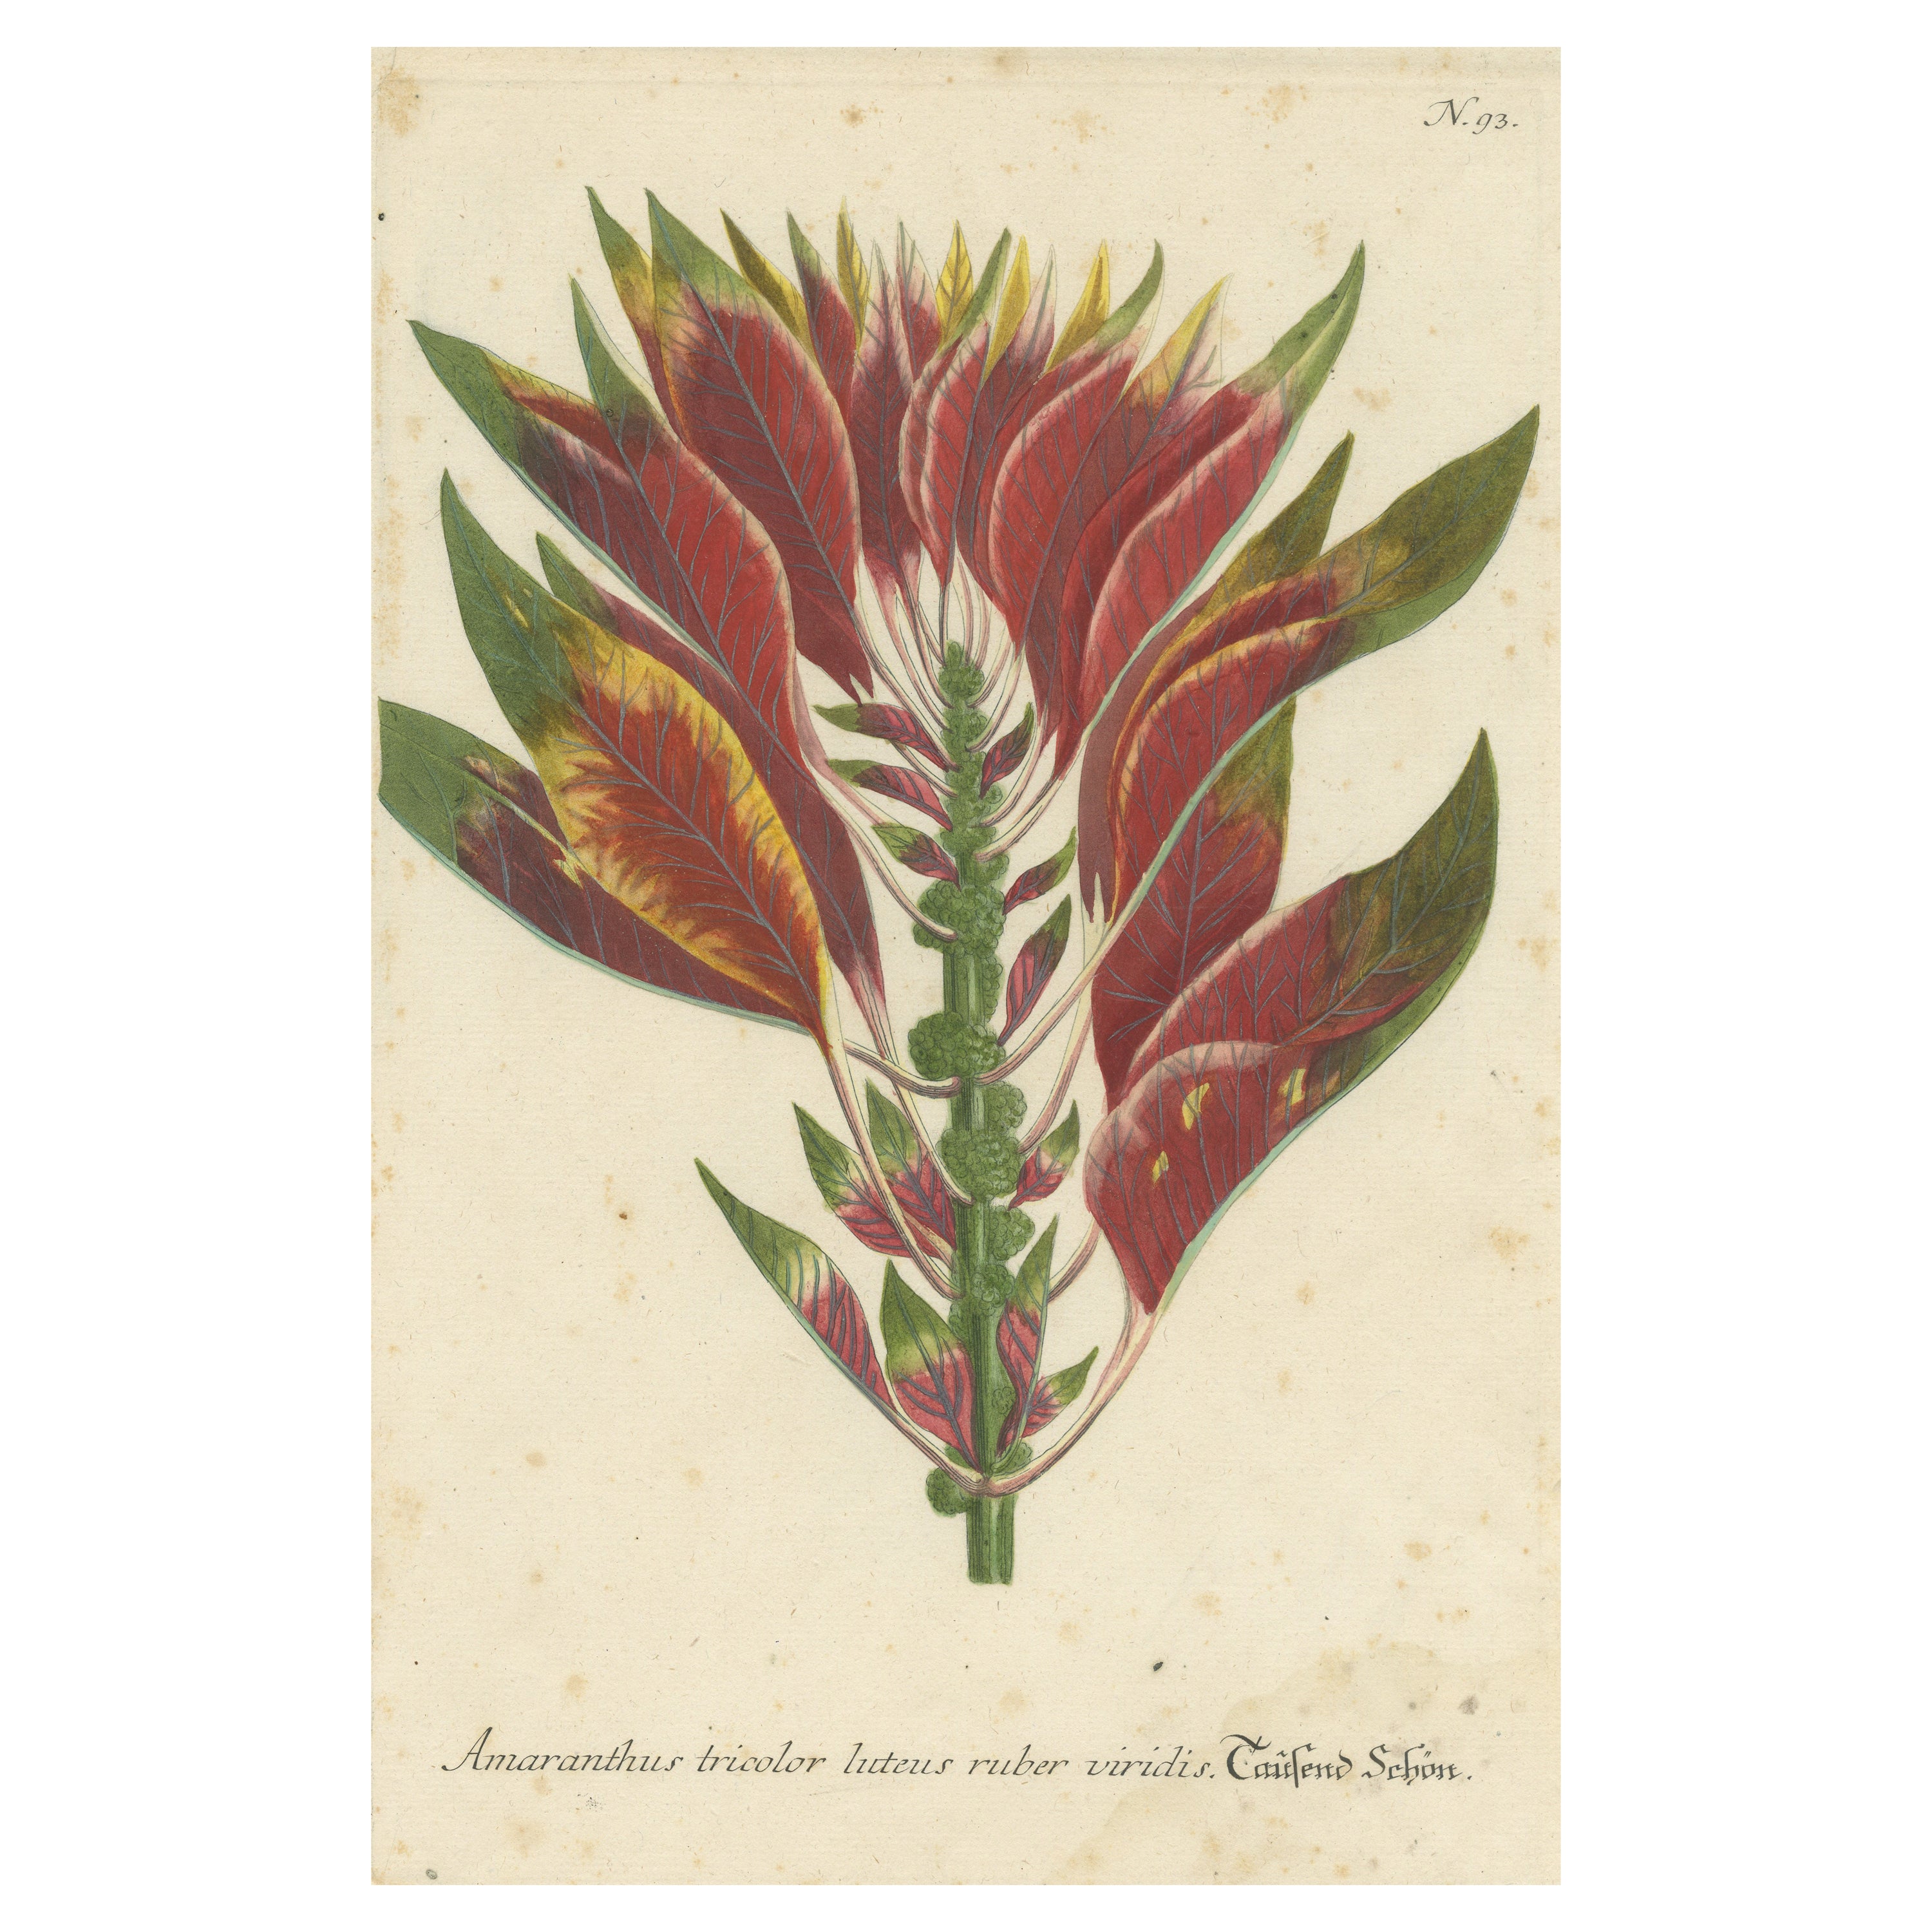 Hand-finished Mezzotint Engraving of Amaranthus Tricolor For Sale